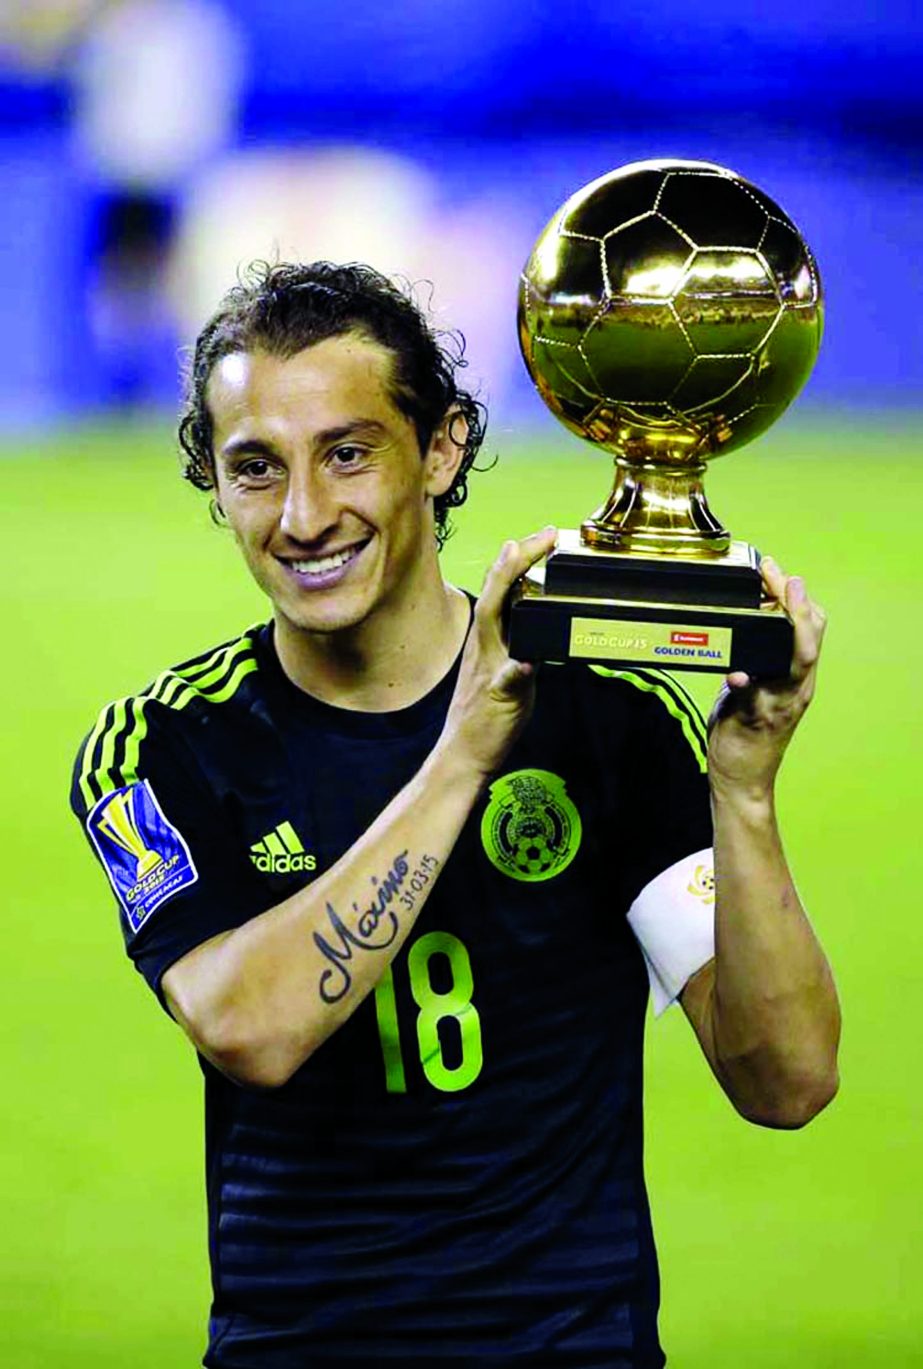 Mexico's Andres Guardado poses with the Golden Ball trophy after the CONCACAF Gold Cup championship soccer match against Jamaica in Philadelphia on Sunday. Mexico won the match 3-1.